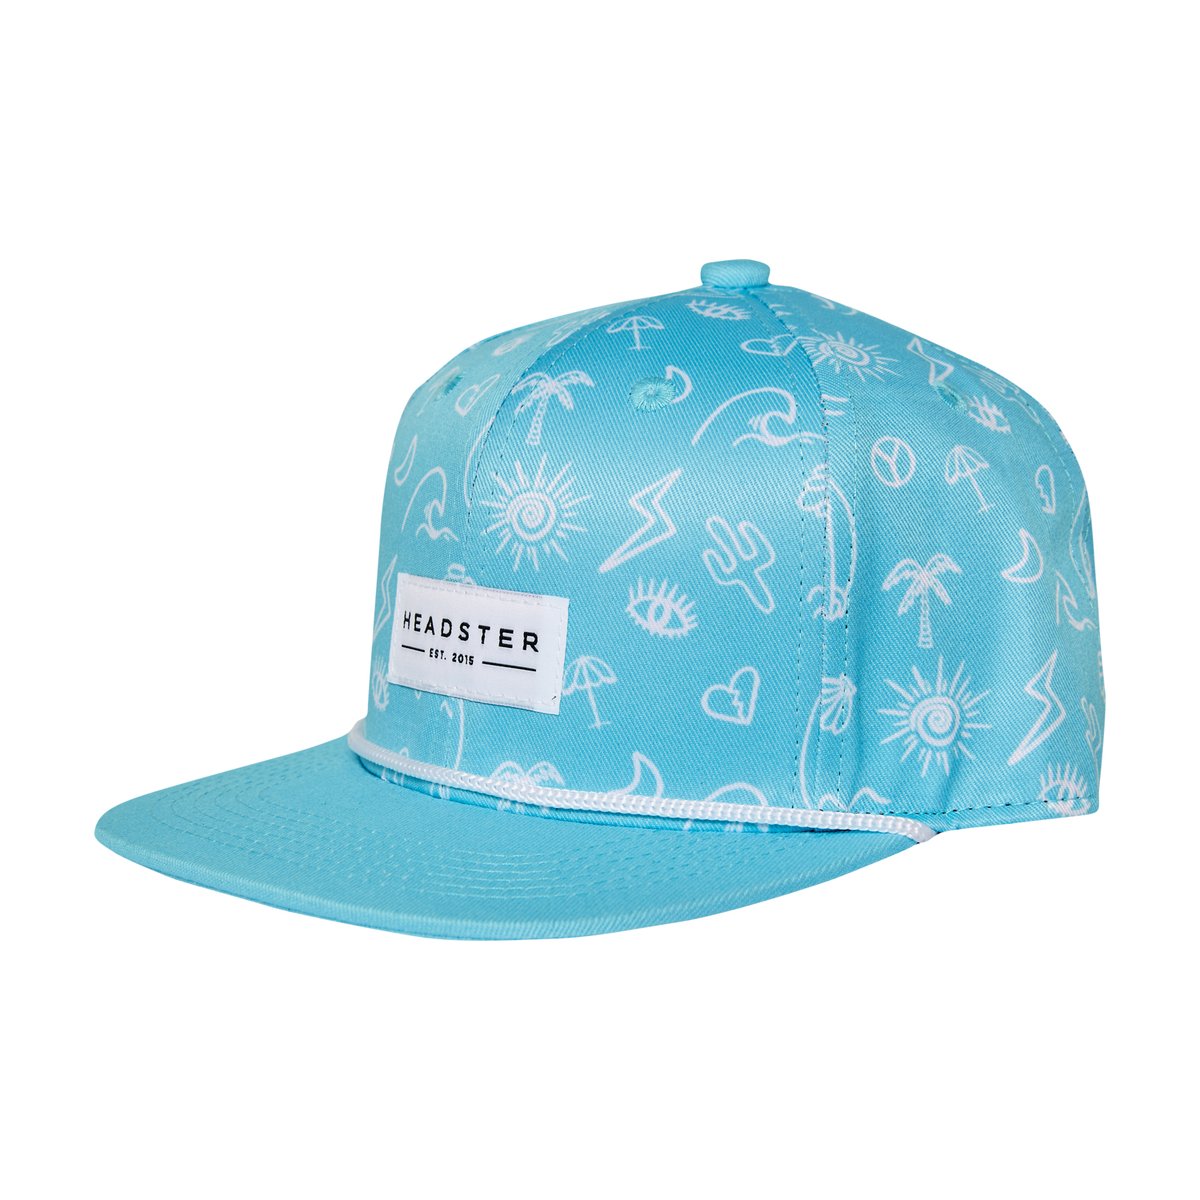 Headster - Casquette - Surf's Up Turquoise